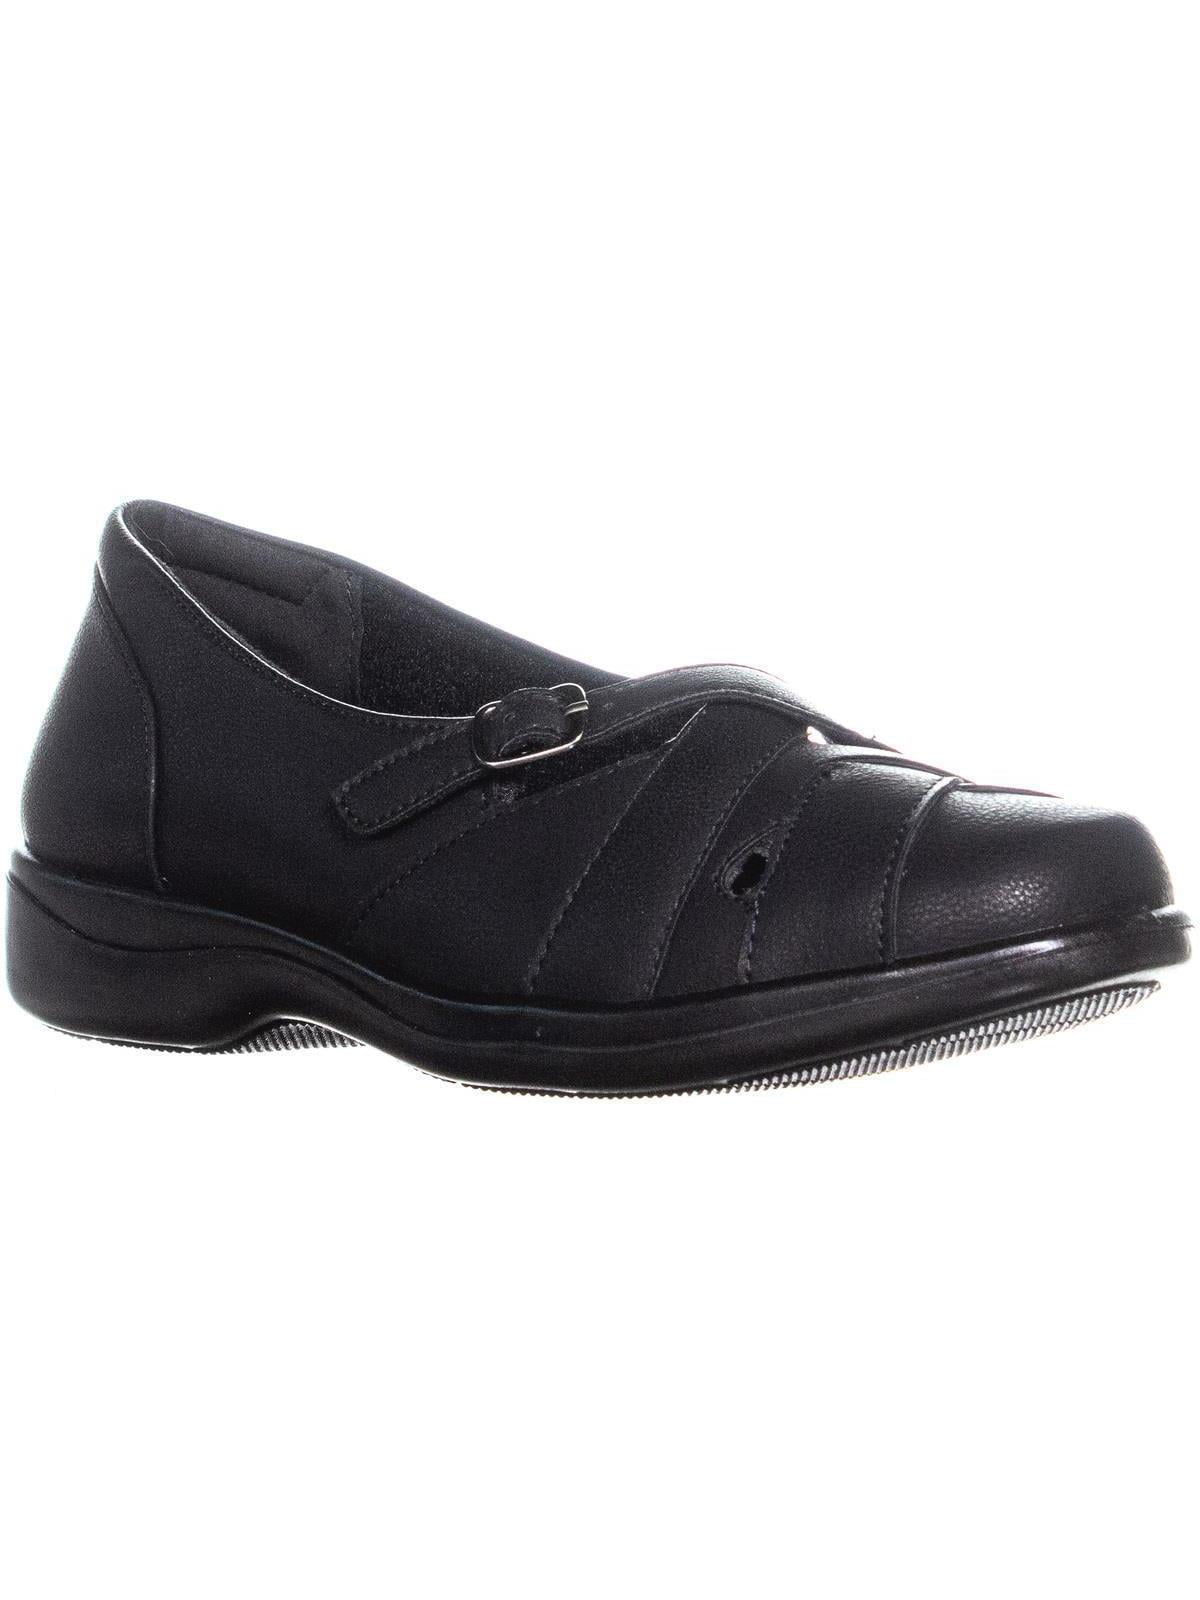 Easy Street Womens Sync Loafer Flat